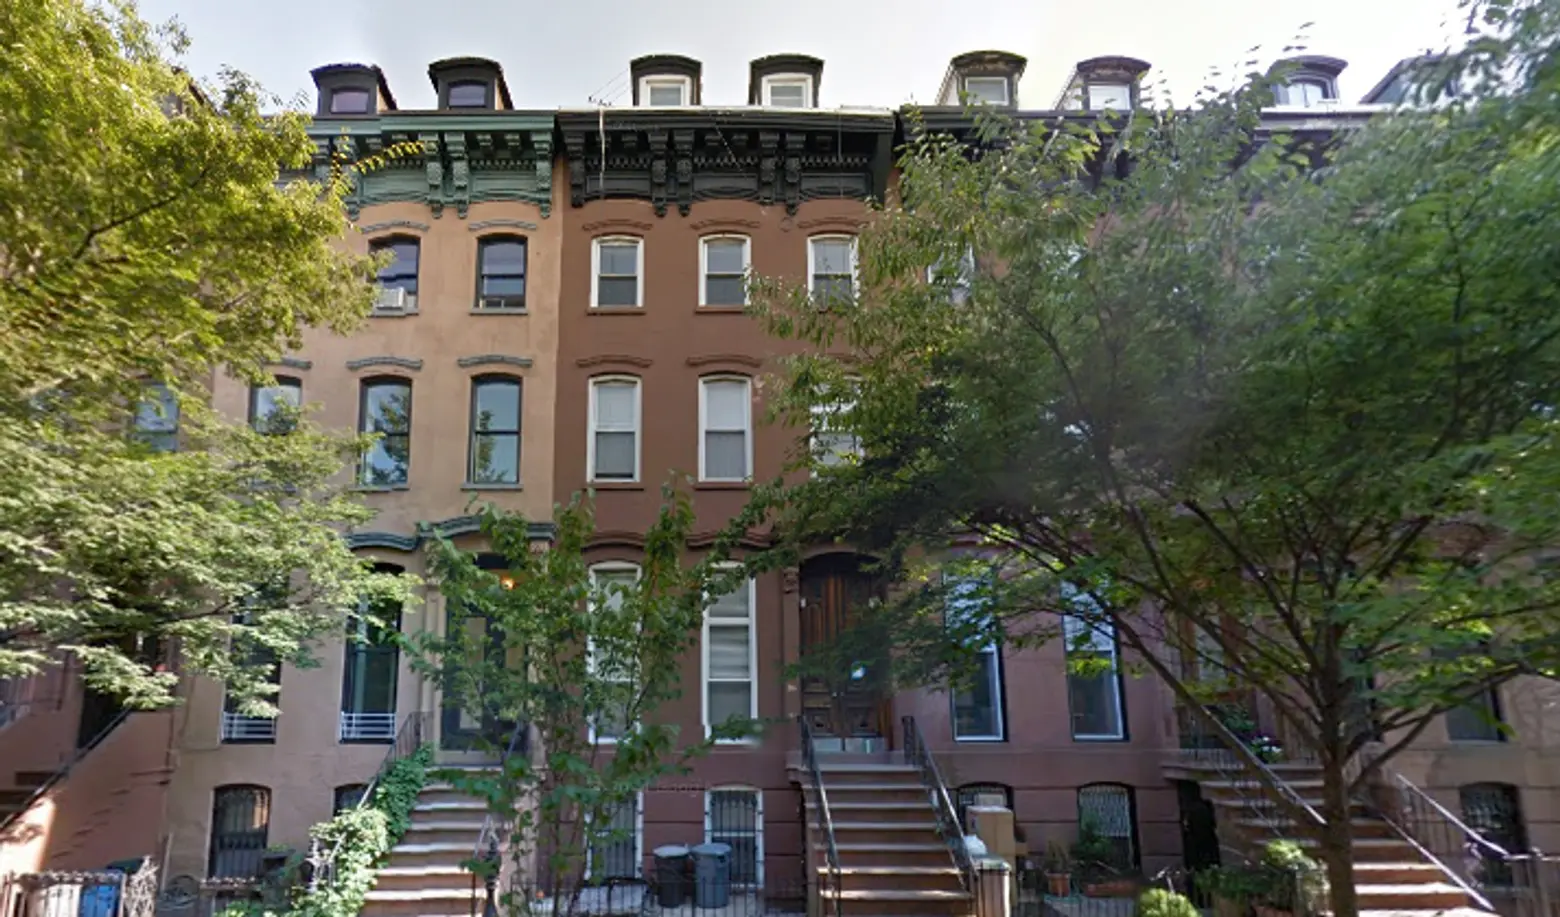 Adrian Grenier Buys Five-Story Clinton Hill Townhouse for $2.1 Million